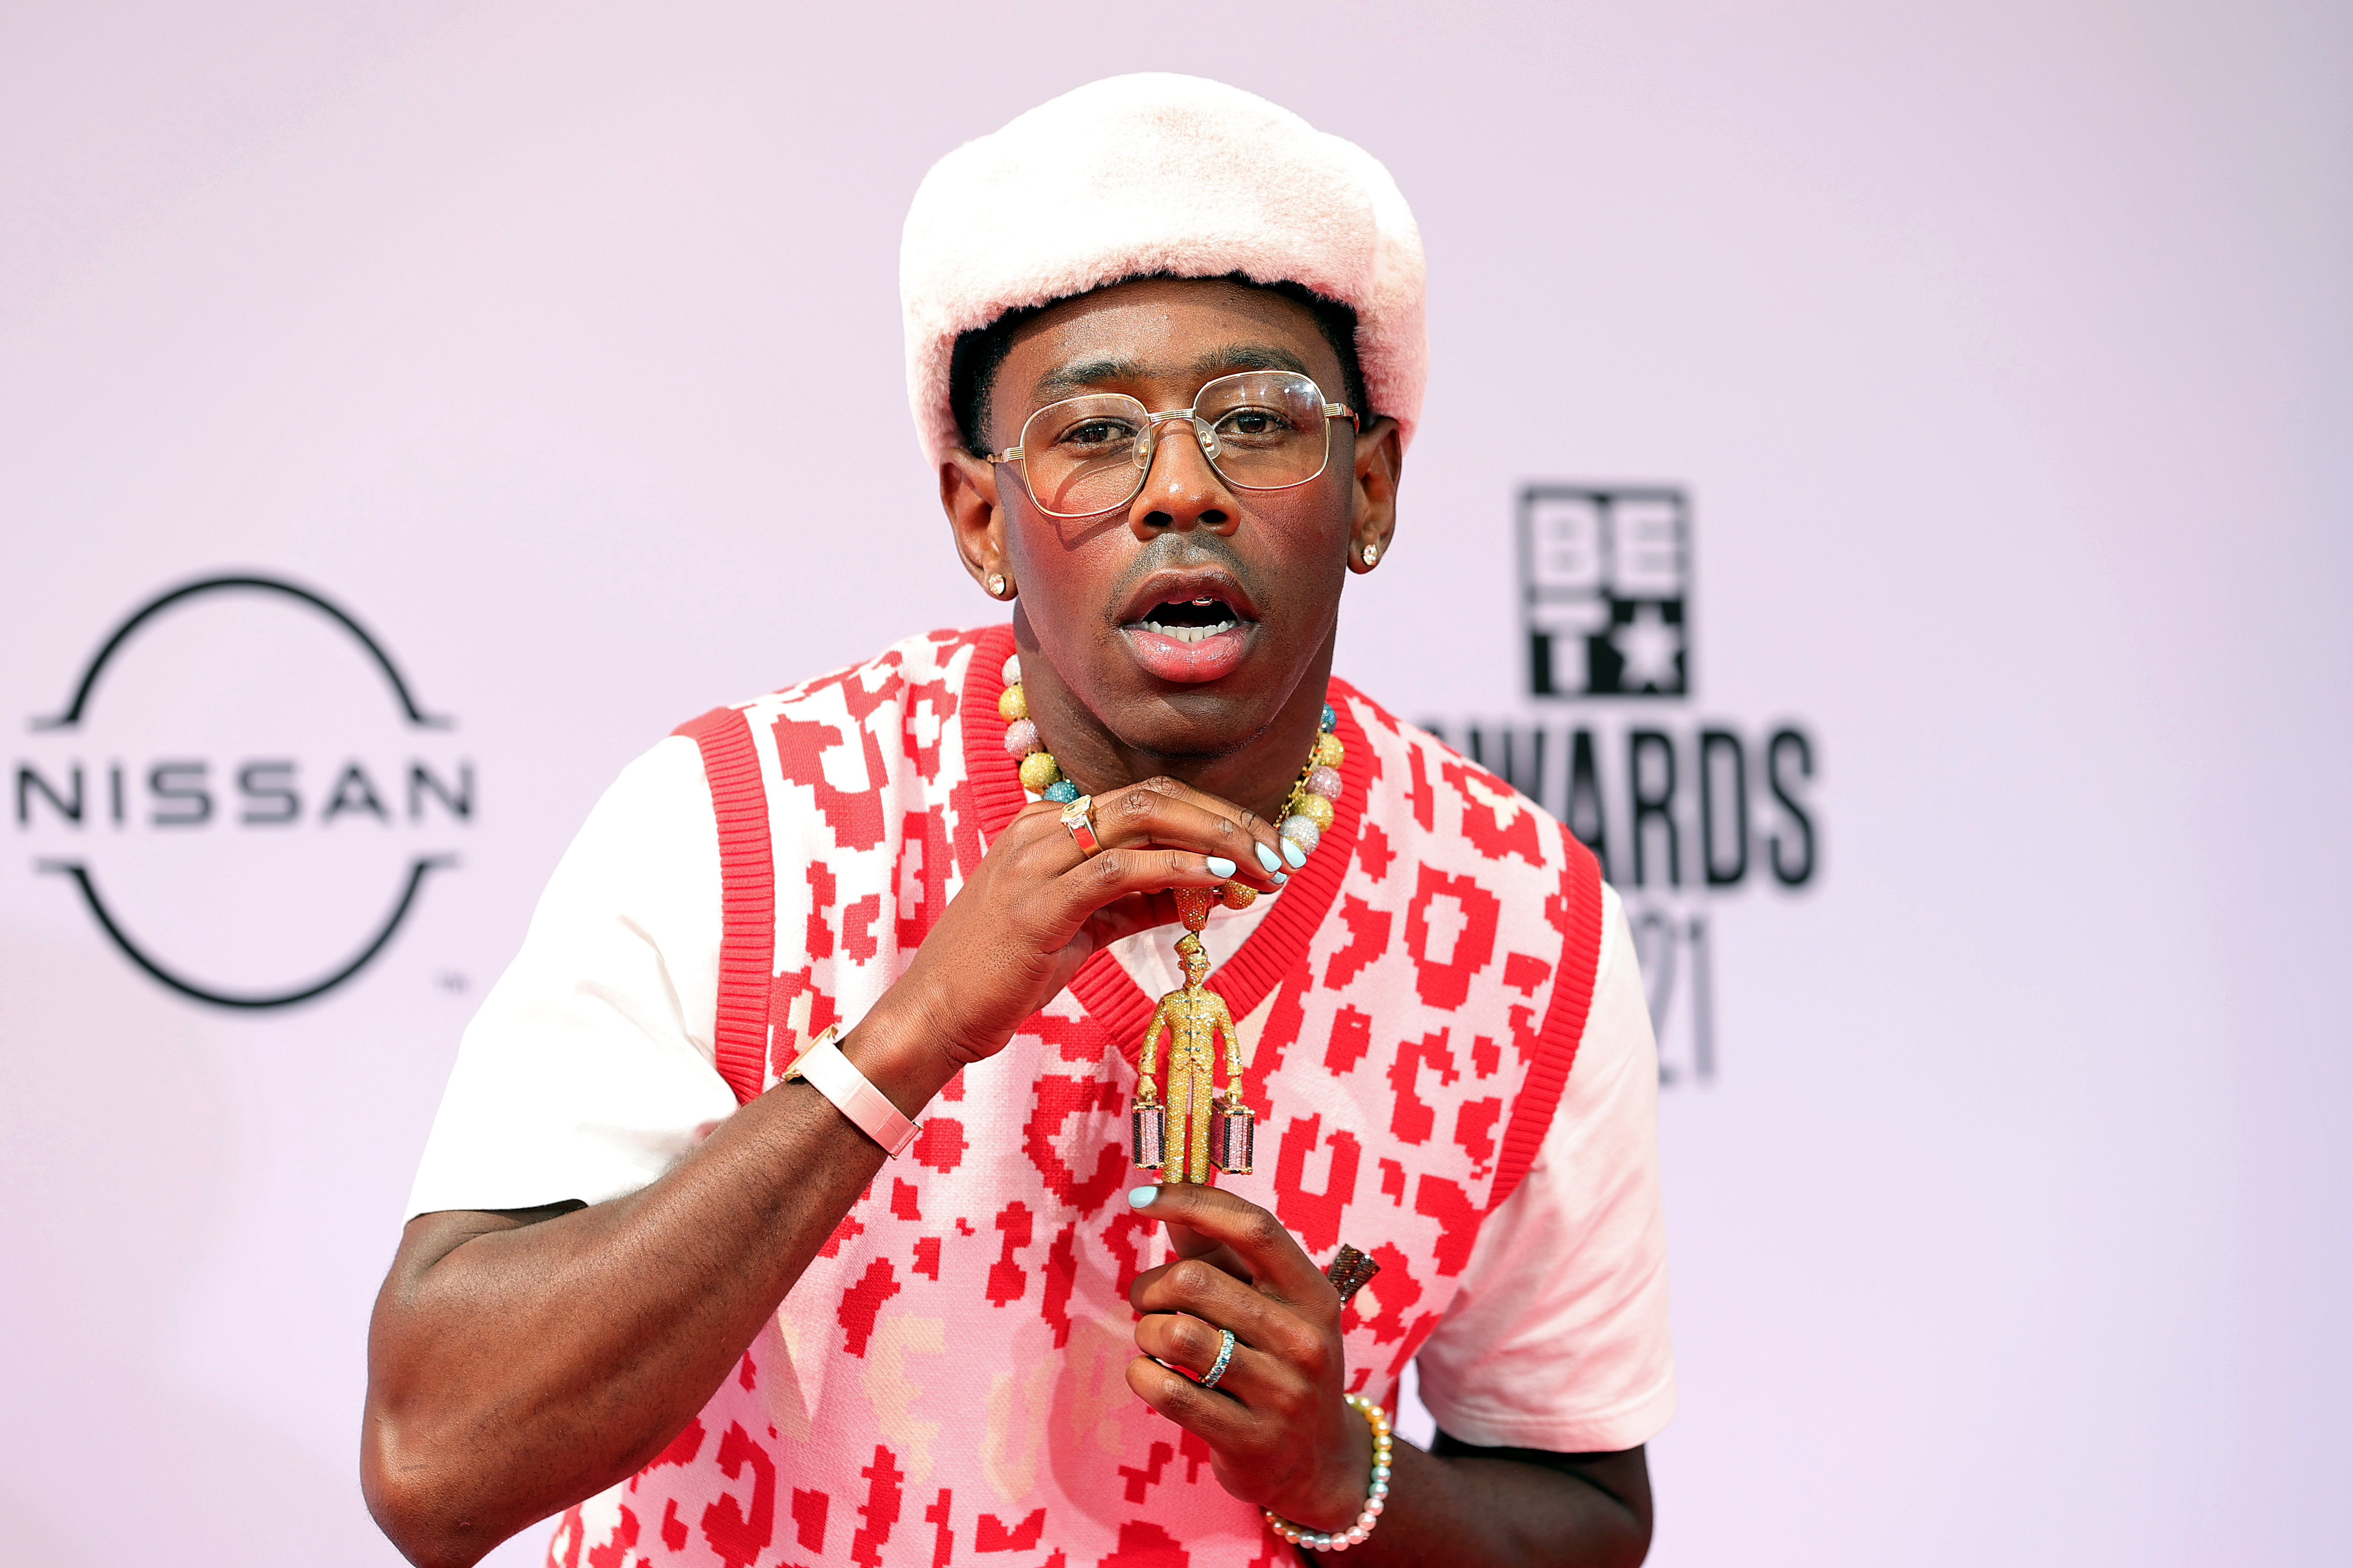 Photo: Tyler, the Creator wins award at the 62nd annual Grammy Awards in  Los Angeles - LAP20200126276 